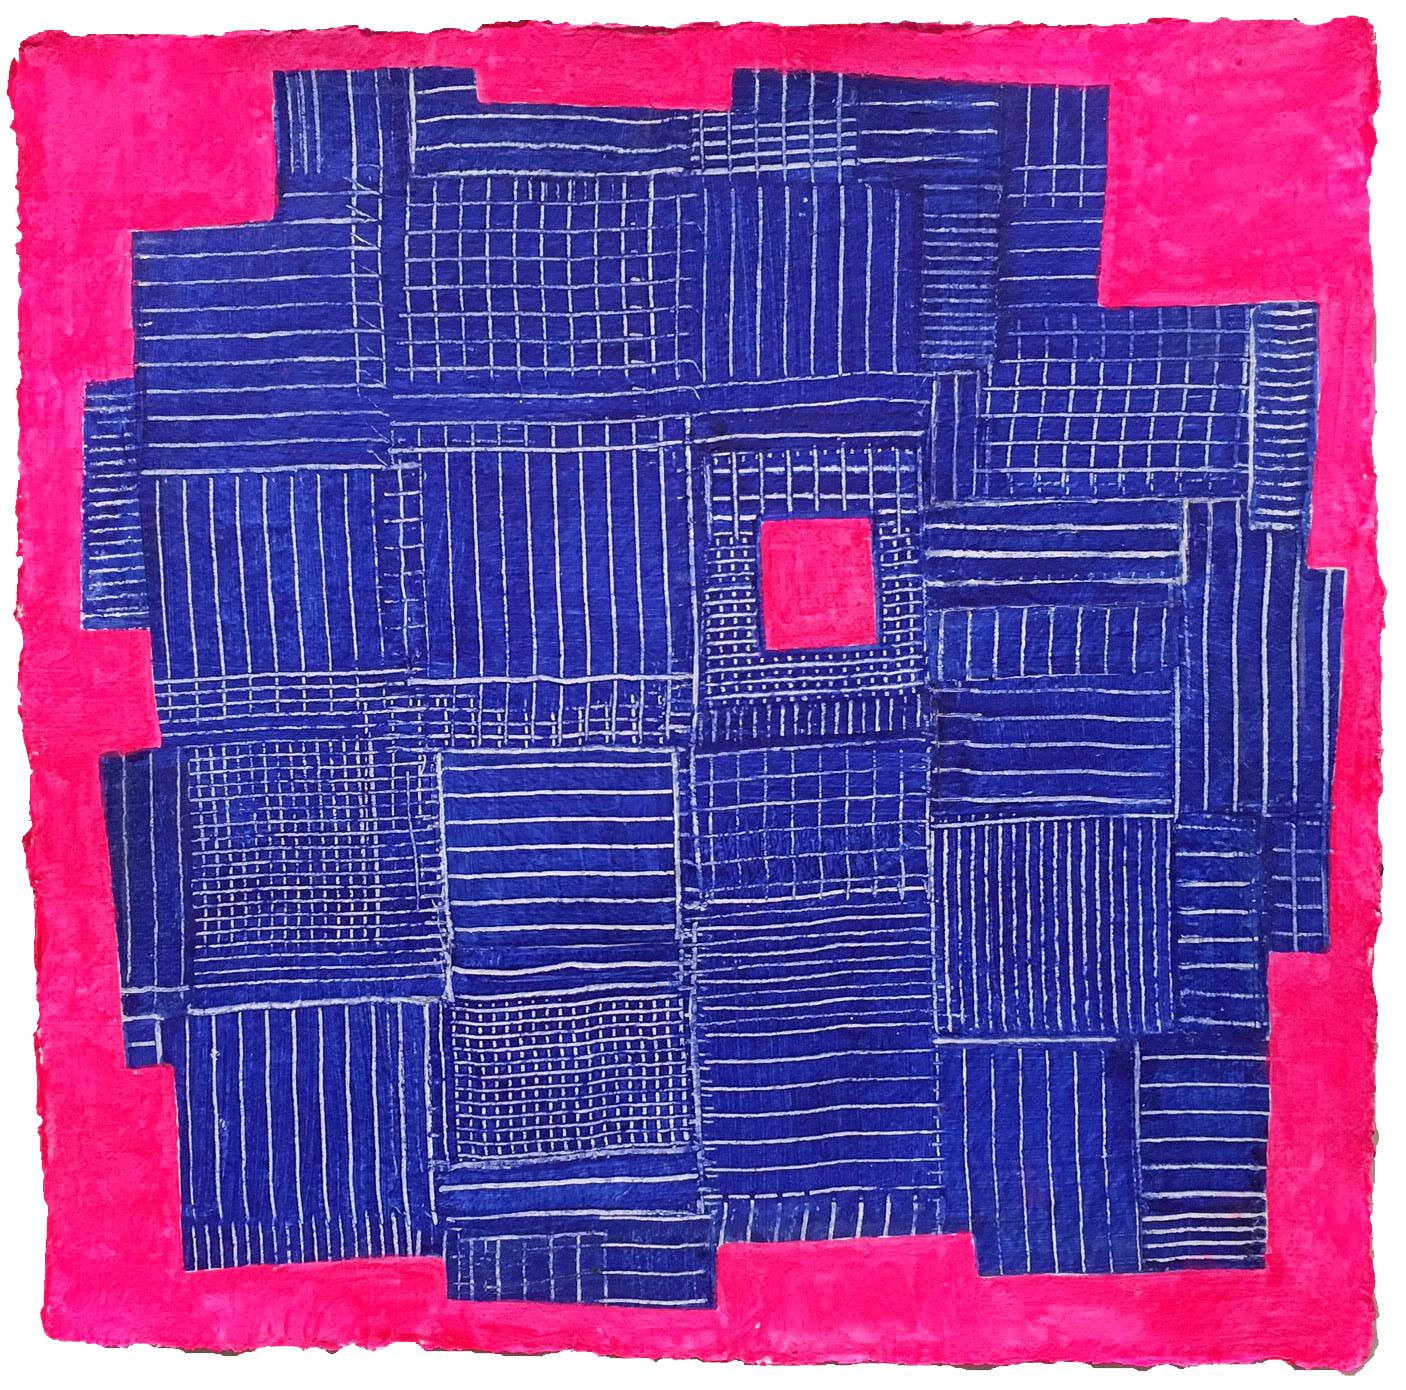 Andra Samelson, Stars of Tallapooza,  Acrylic on paper, 12 x 12 inches, 2018 For Sale 3